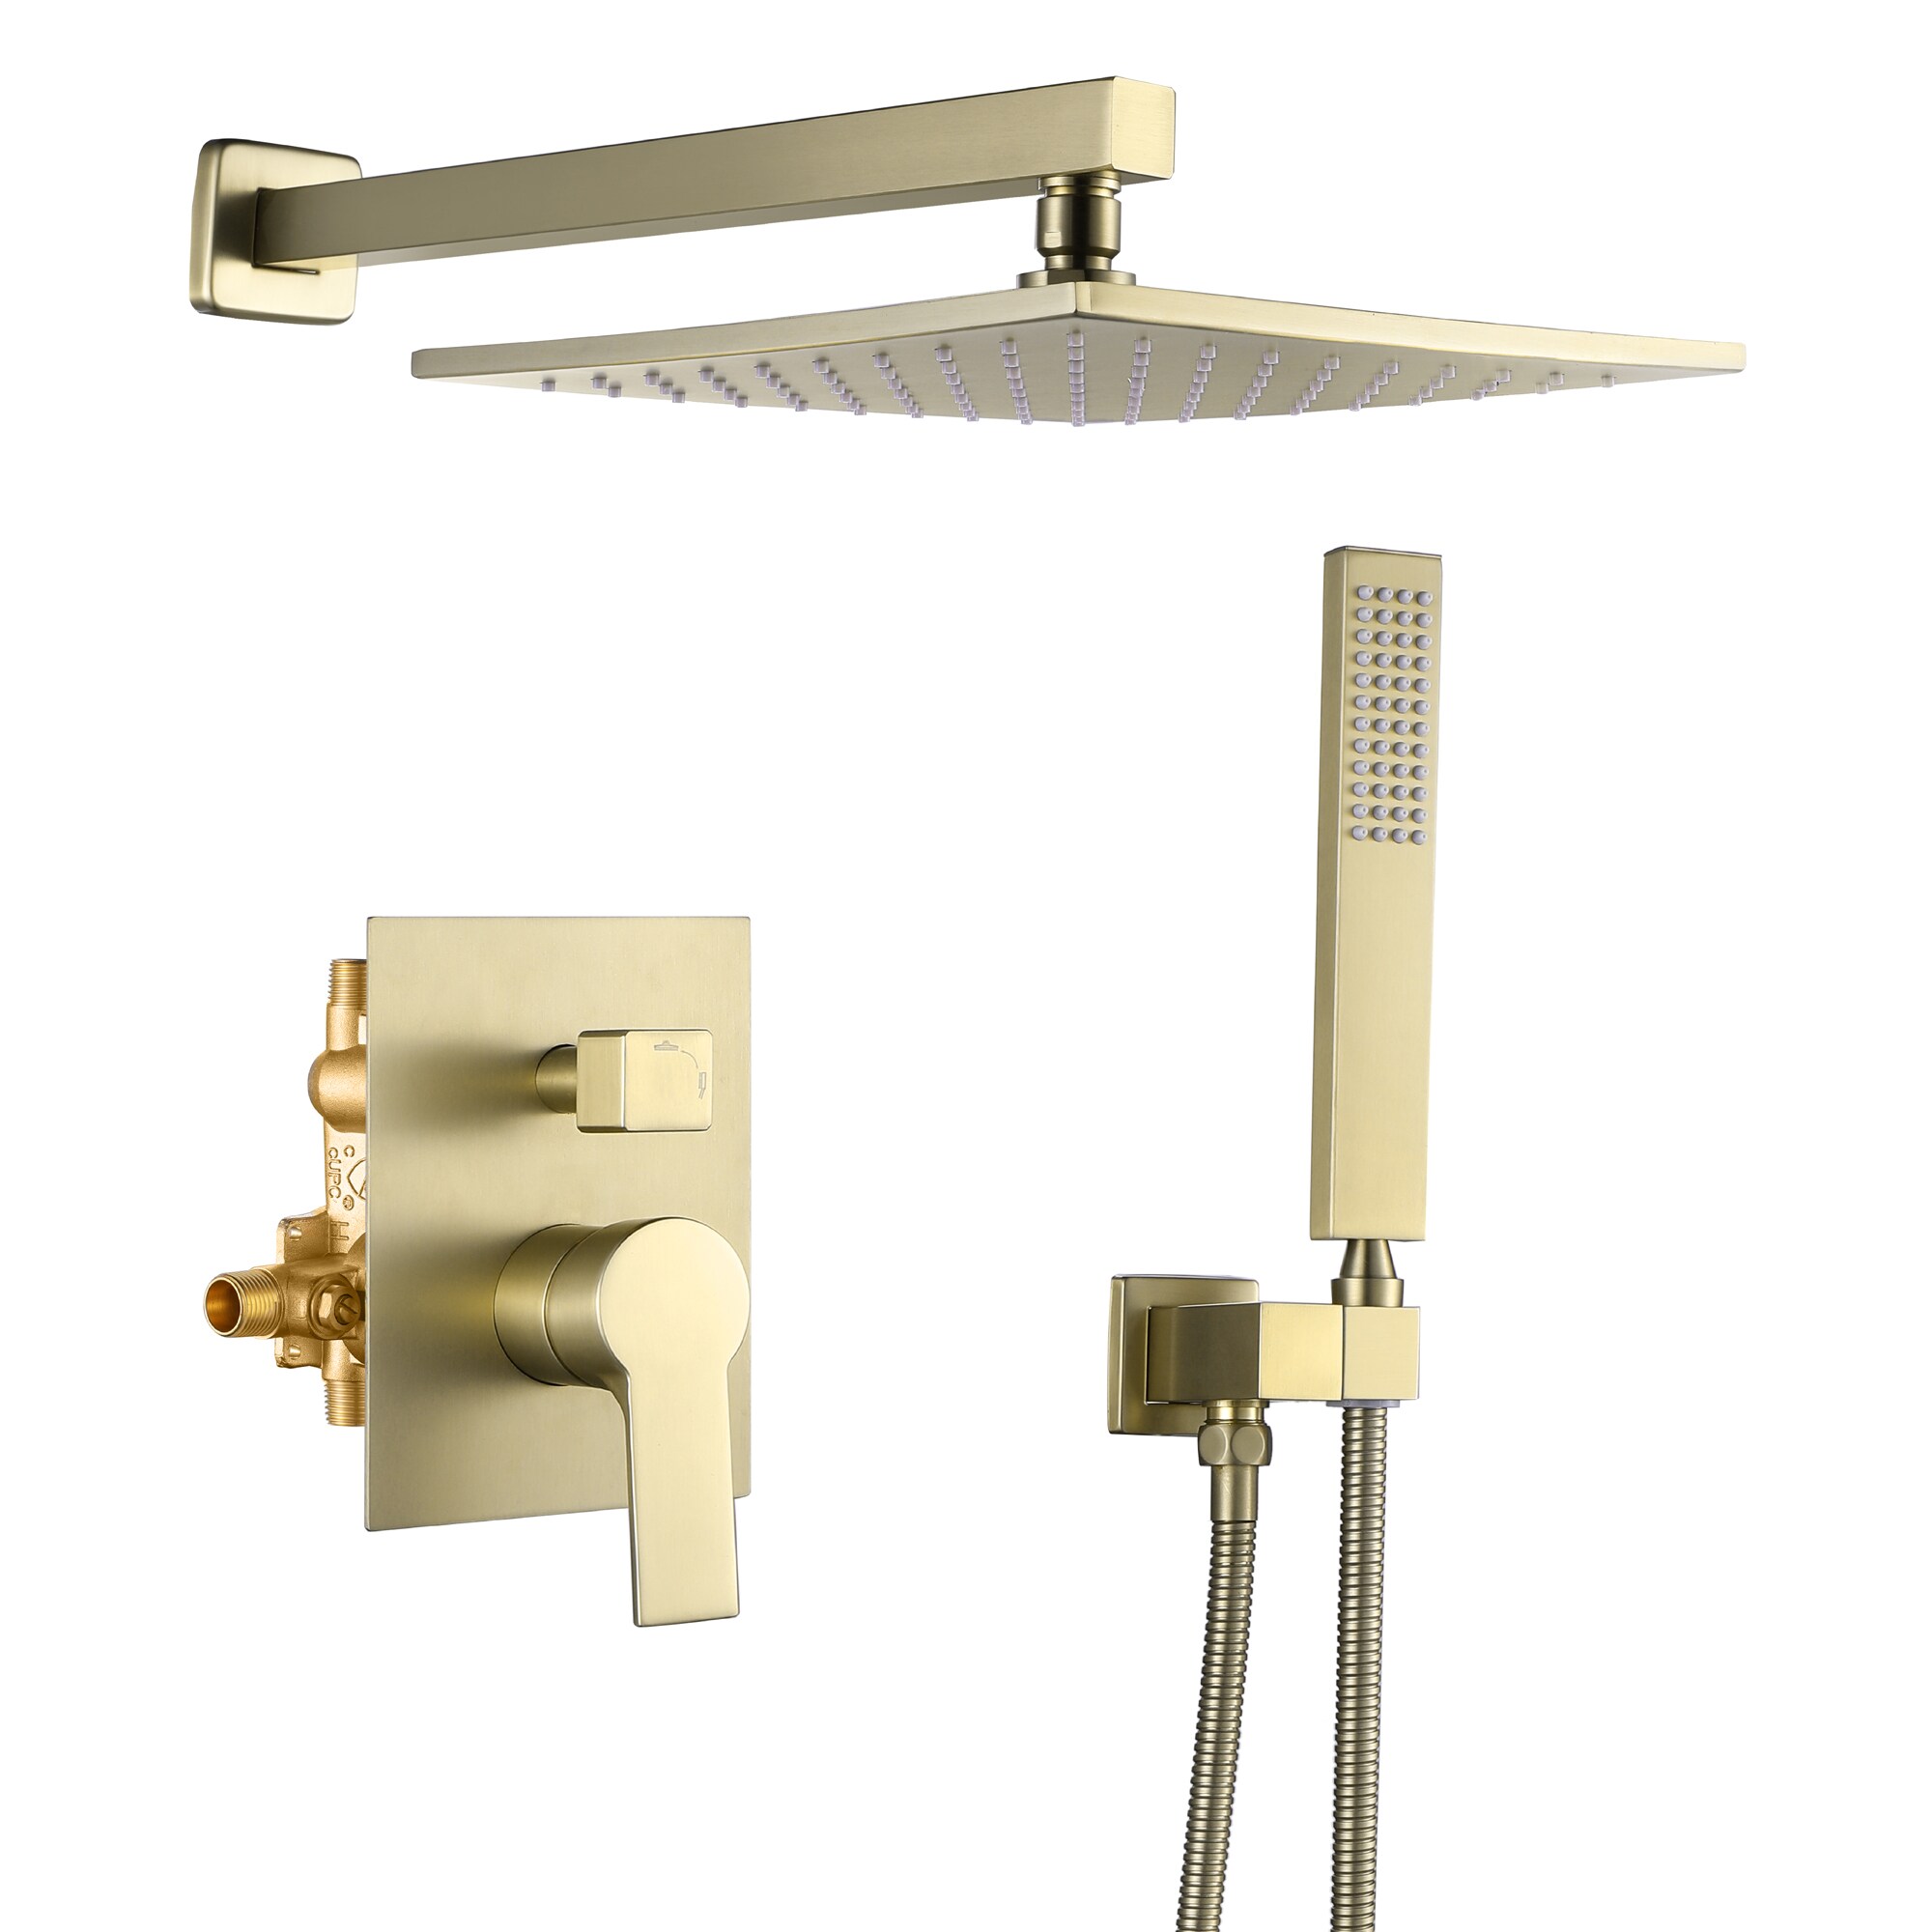 WELLFOR 10-inch Wall Mount Shower System Brushed Gold Dual Head Waterfall  Built-In Shower Faucet System with 3-way Diverter Valve Included in the  Shower Systems department at